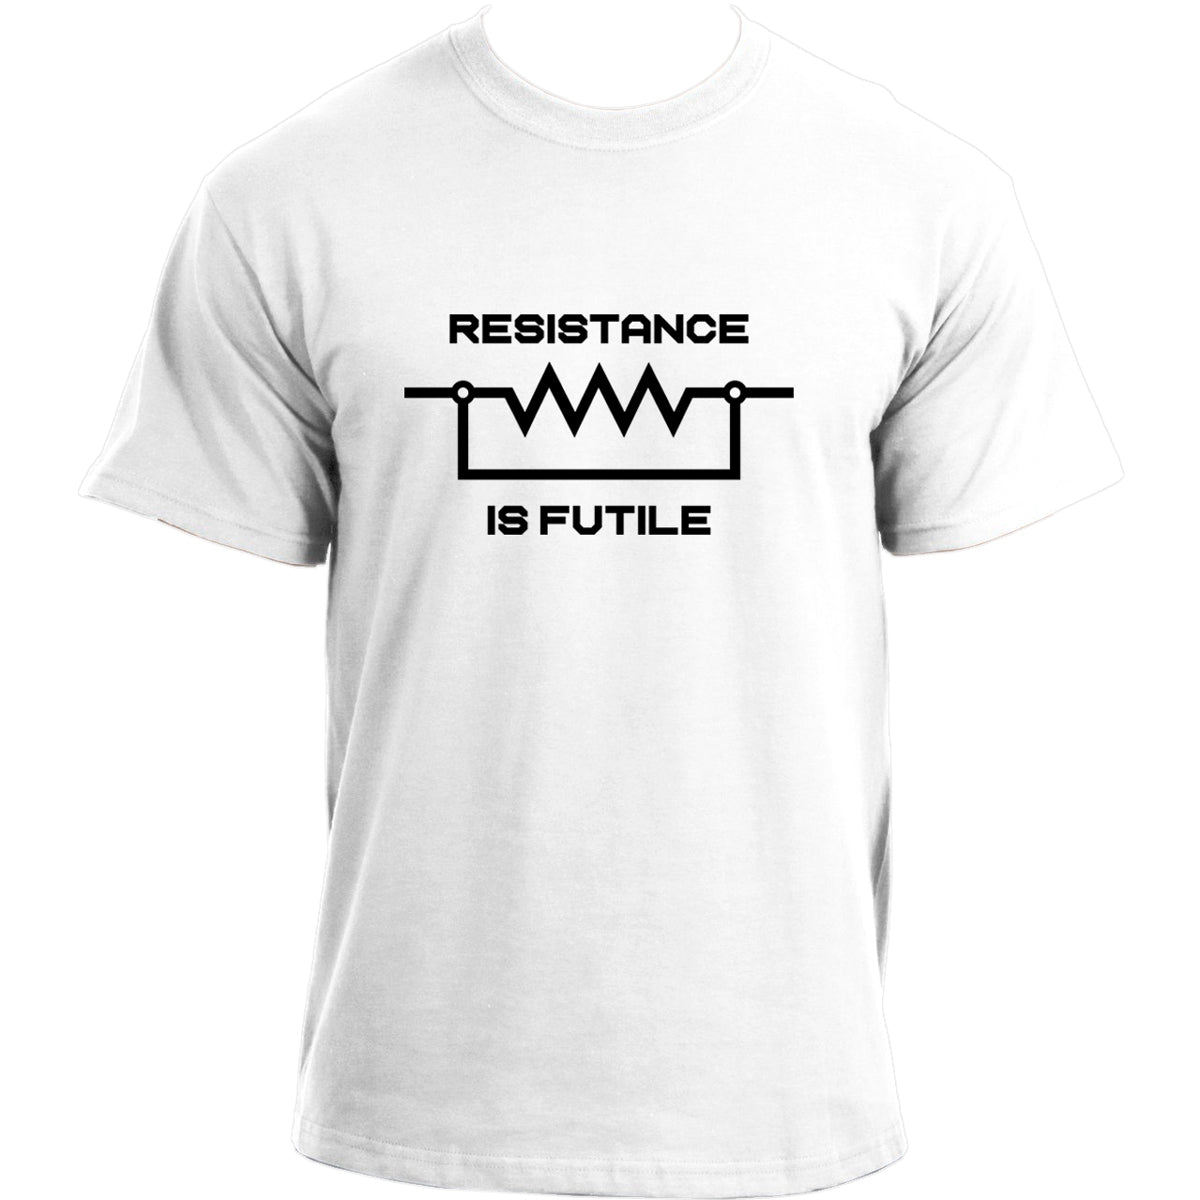 Resistance Is Not Futile T-SHIRT Nerd Electrician Science Funny TV Show inspired TShirt